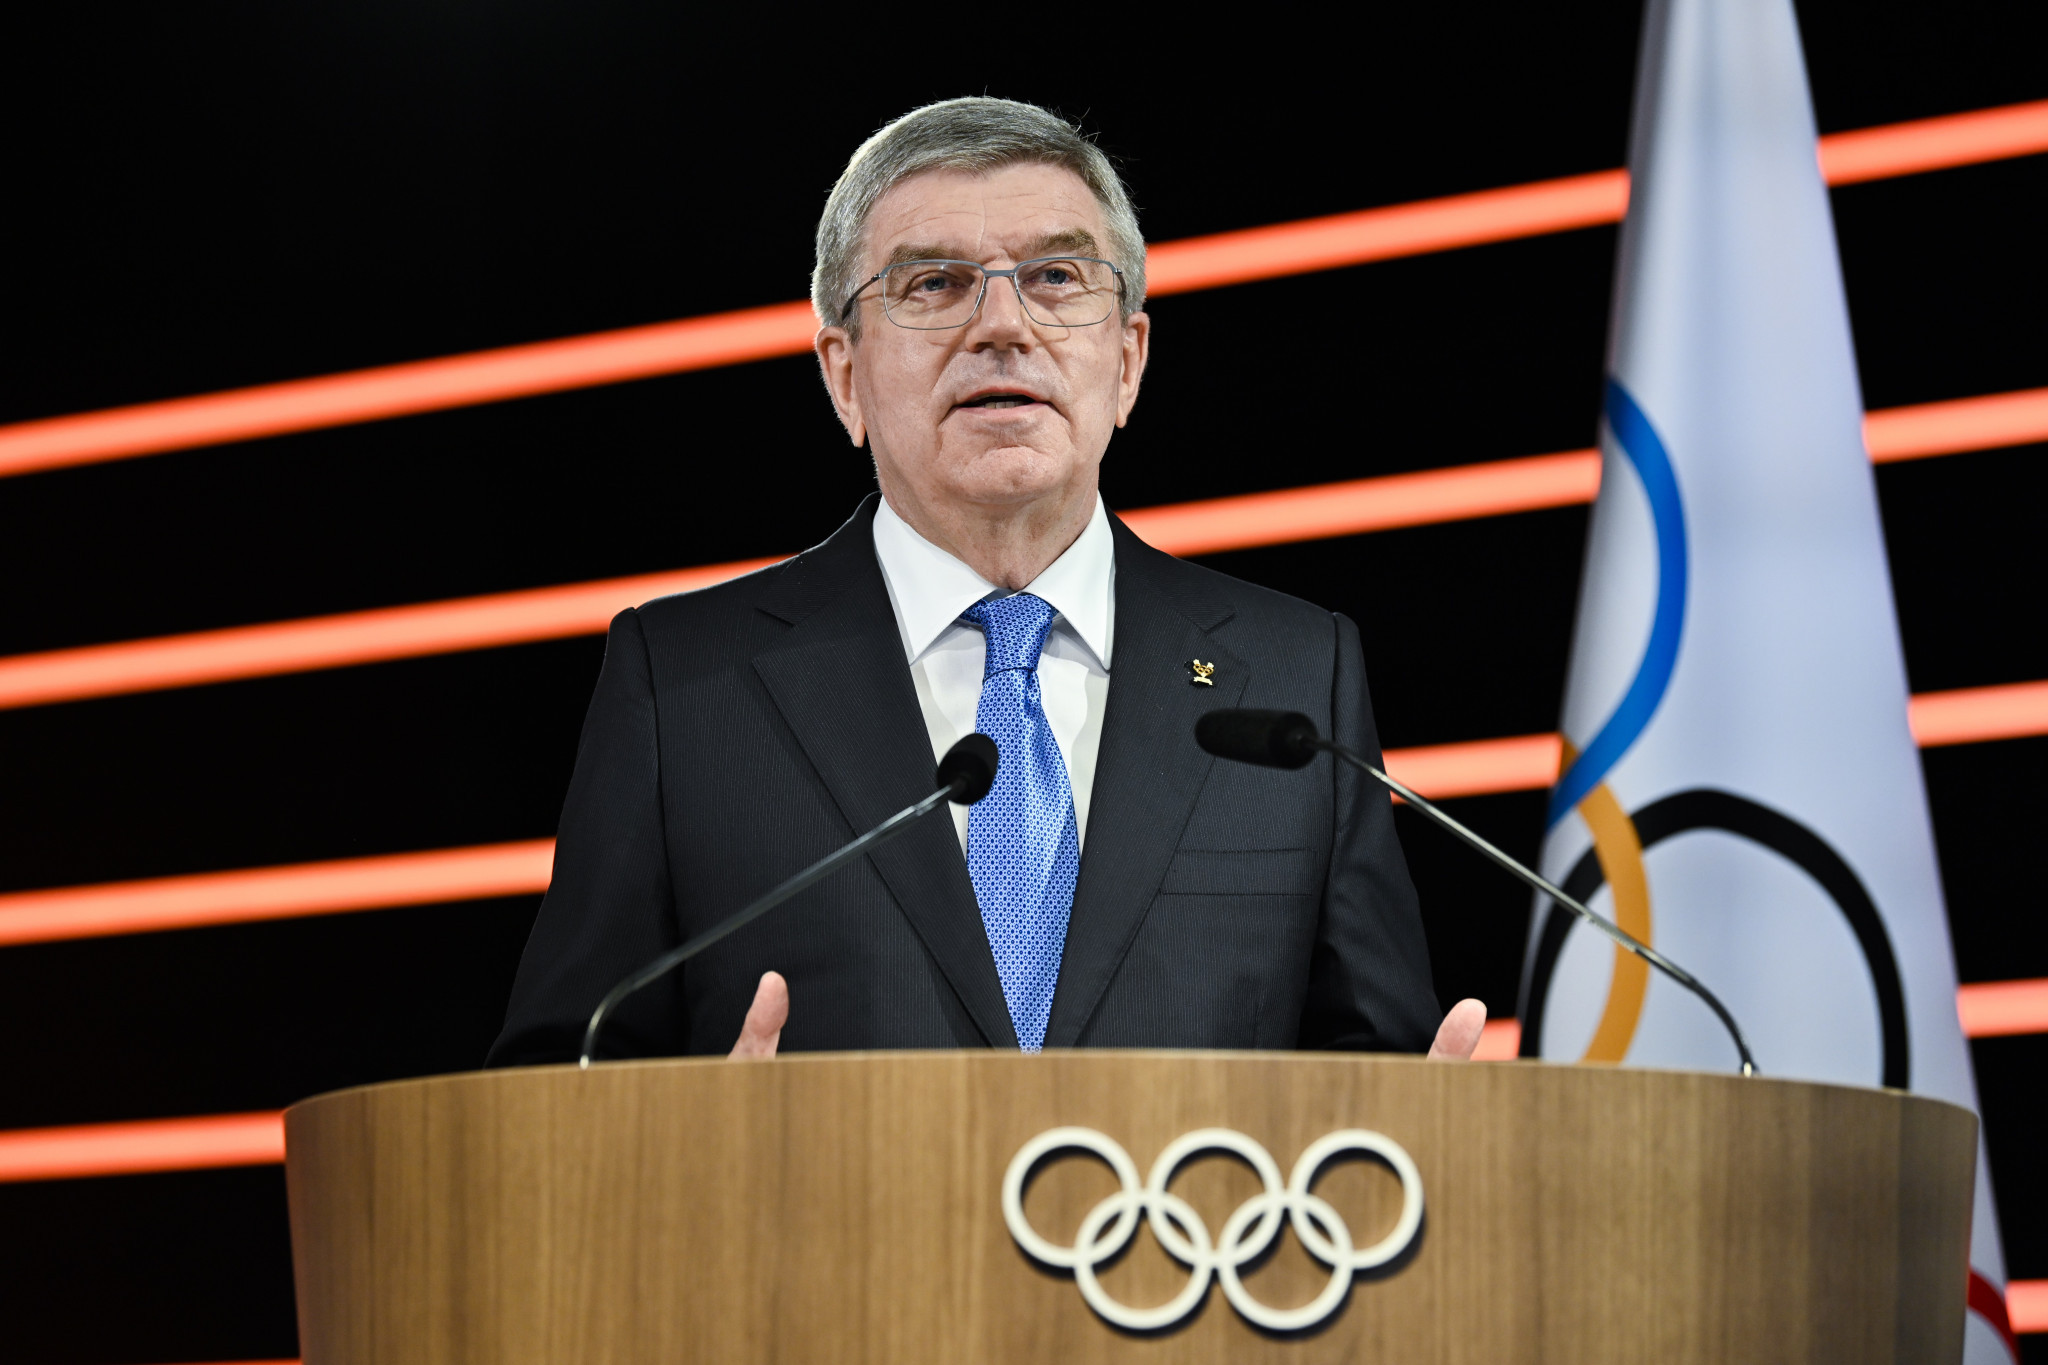 IOC President Thomas Bach recommended the banning of Russian and Belarusian athletes following the invasion of Ukraine ©Getty Images